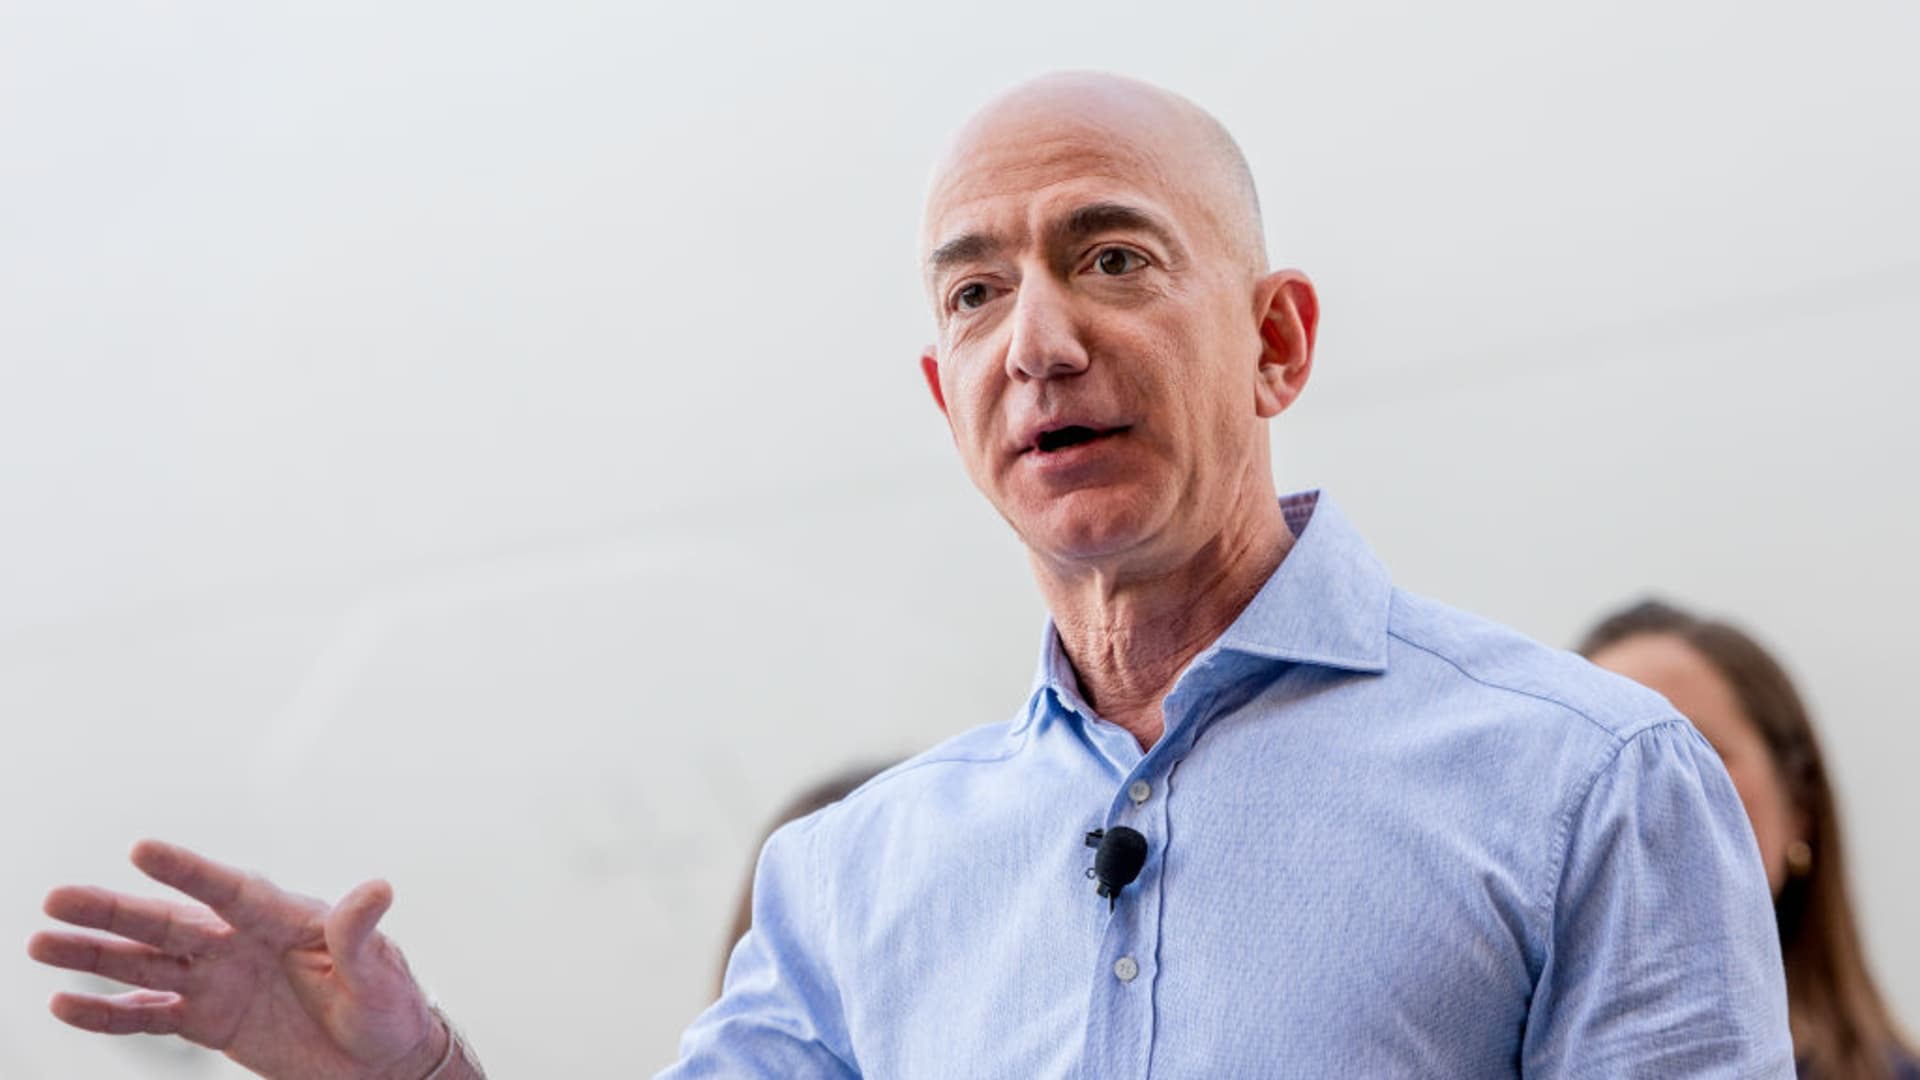 At all-hands meeting Jeff Bezos tells employees he's 'very excited' about the auto industry